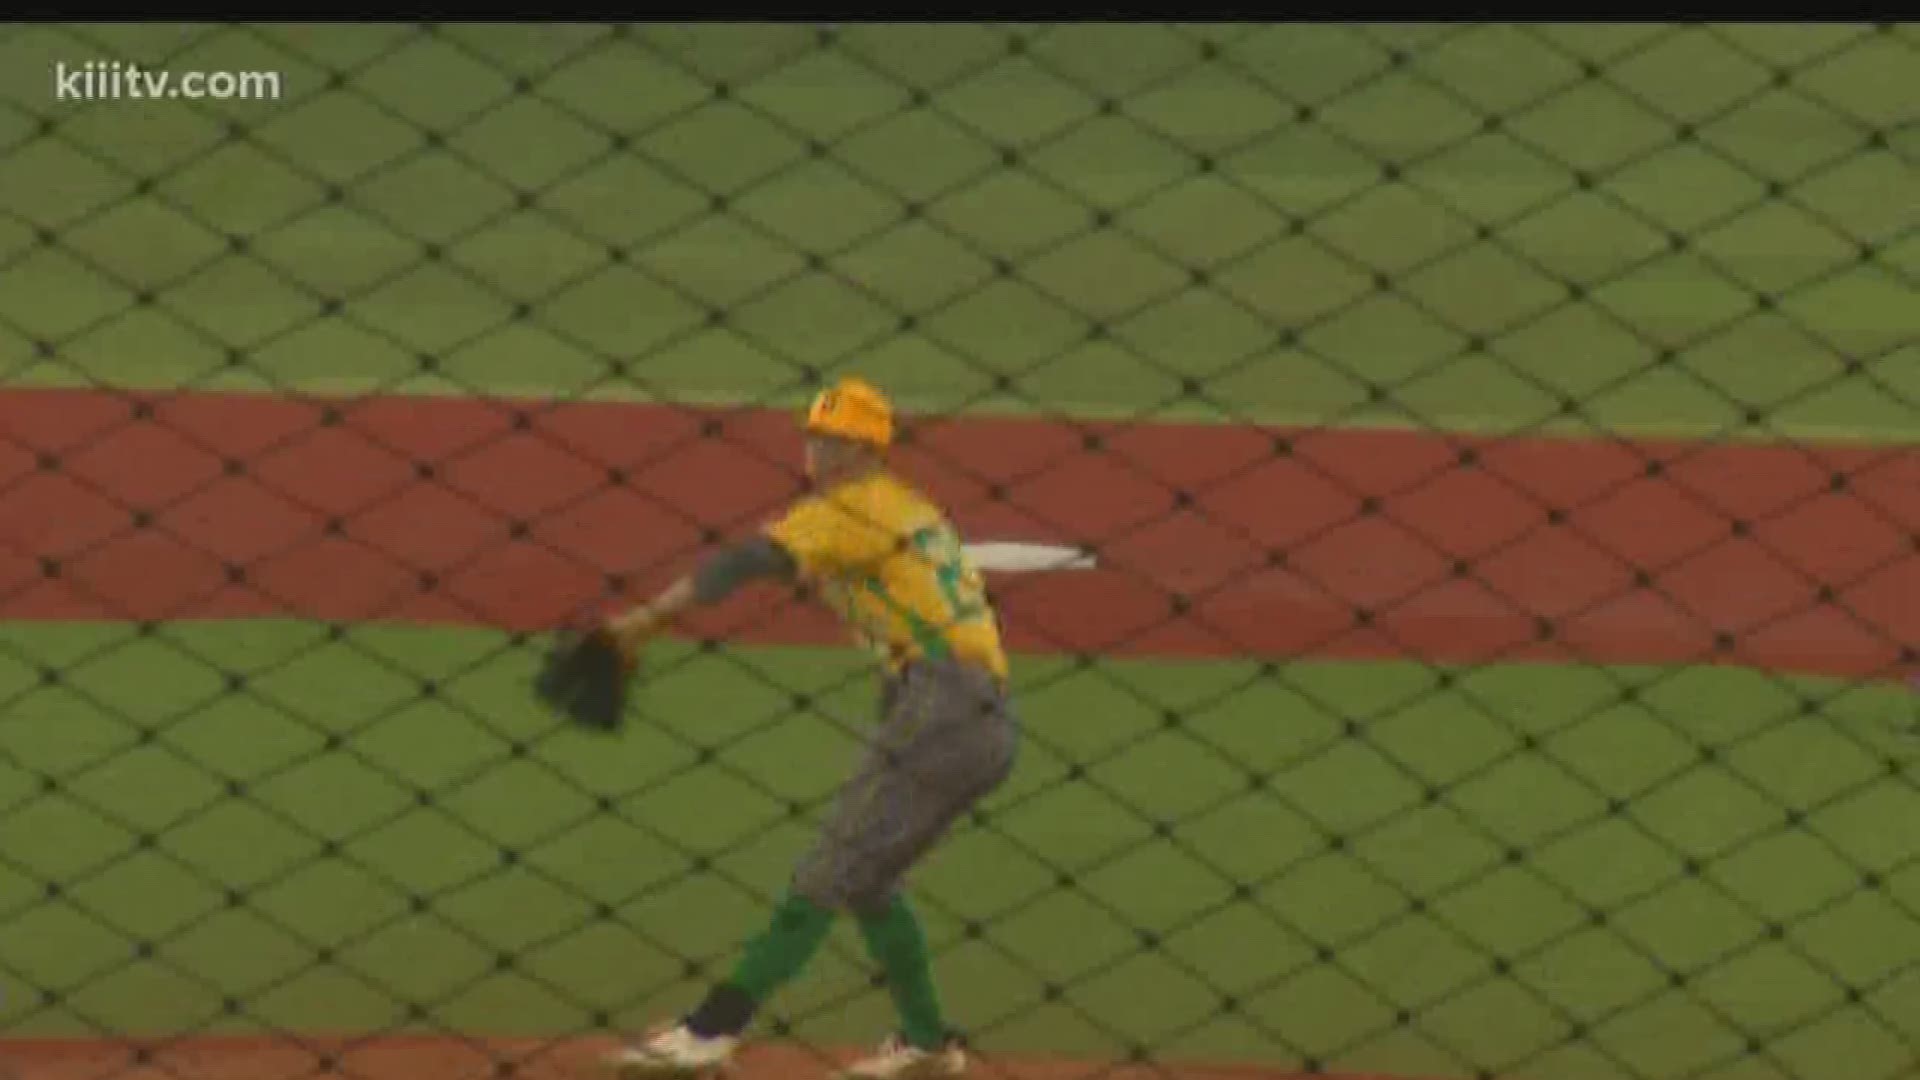 The Badgers got a complete game shutout from Kobe Jaramillo in Game 1 of the Region Semifinal against Hallettsville.